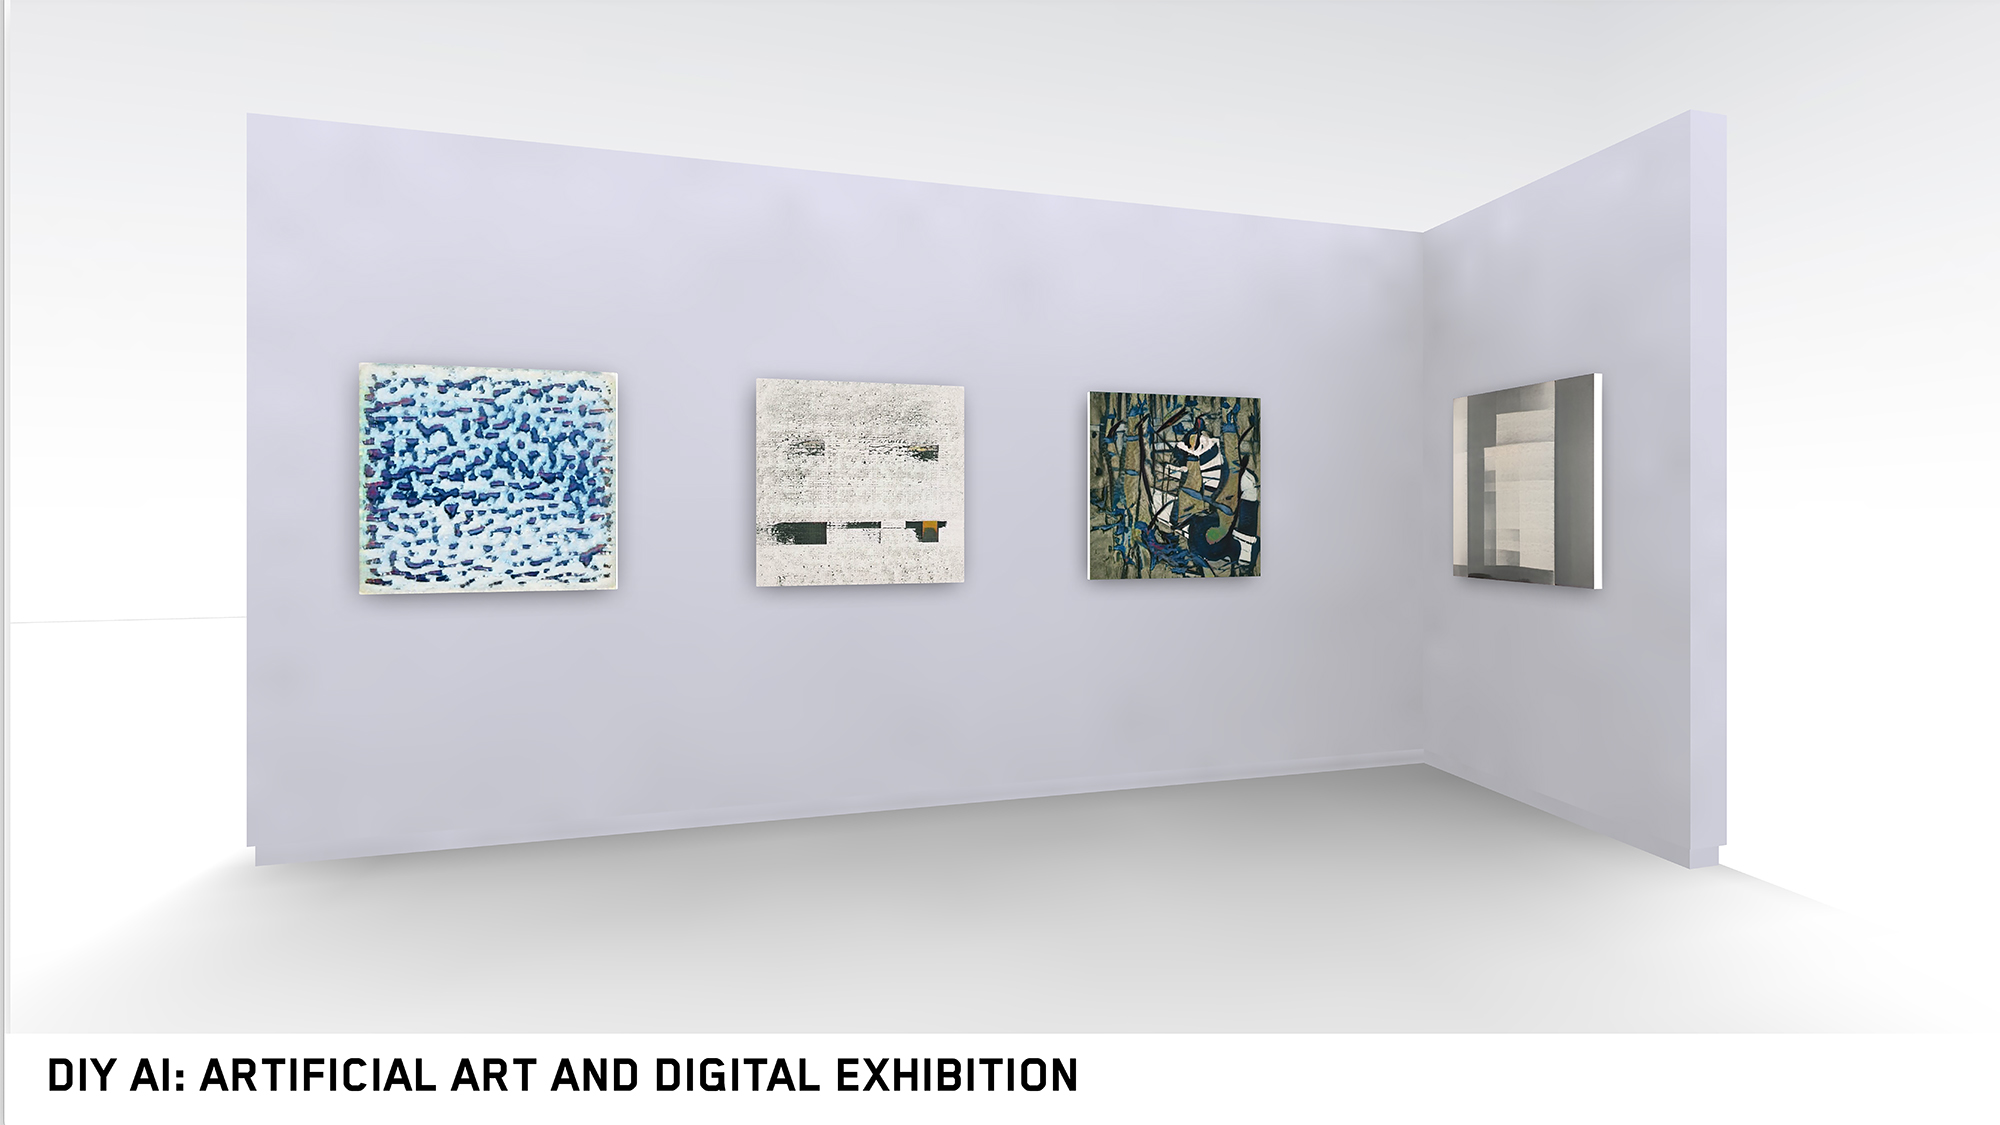 The image shows a corner of a virtual room with a light gray wall modeled in 3D. On the wall, four very different abstract images hang next to each other. The caption reads “DIY AI: Artificial Art and Digital Exhibition.”